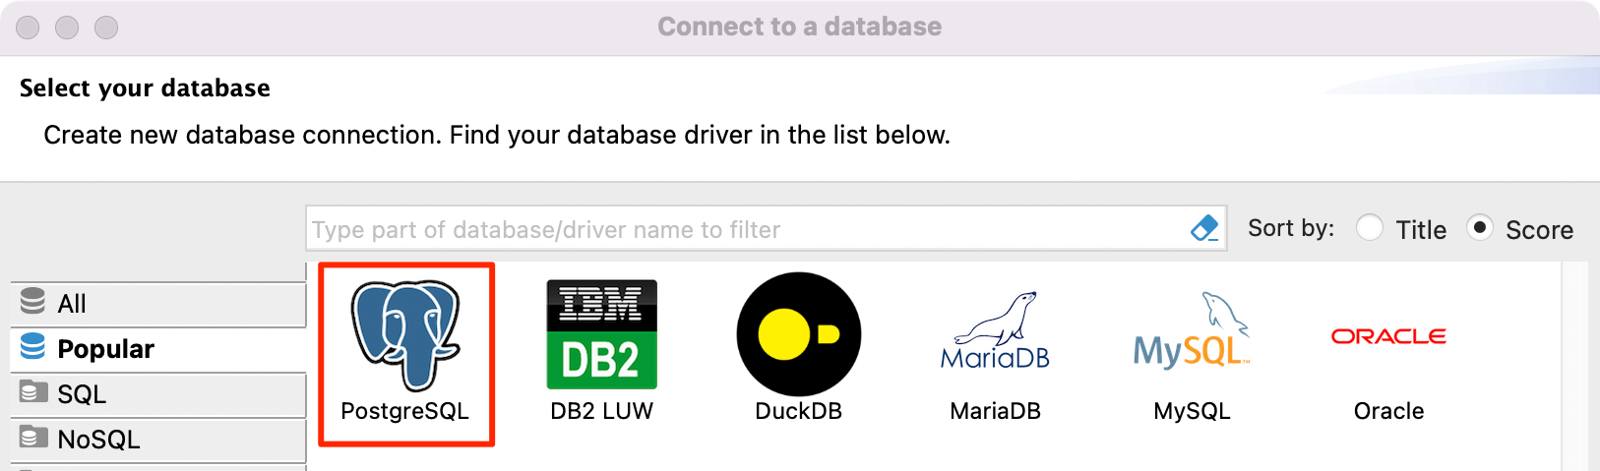 Screenshot of the DBeaver database selection screen with MySQL highlighted